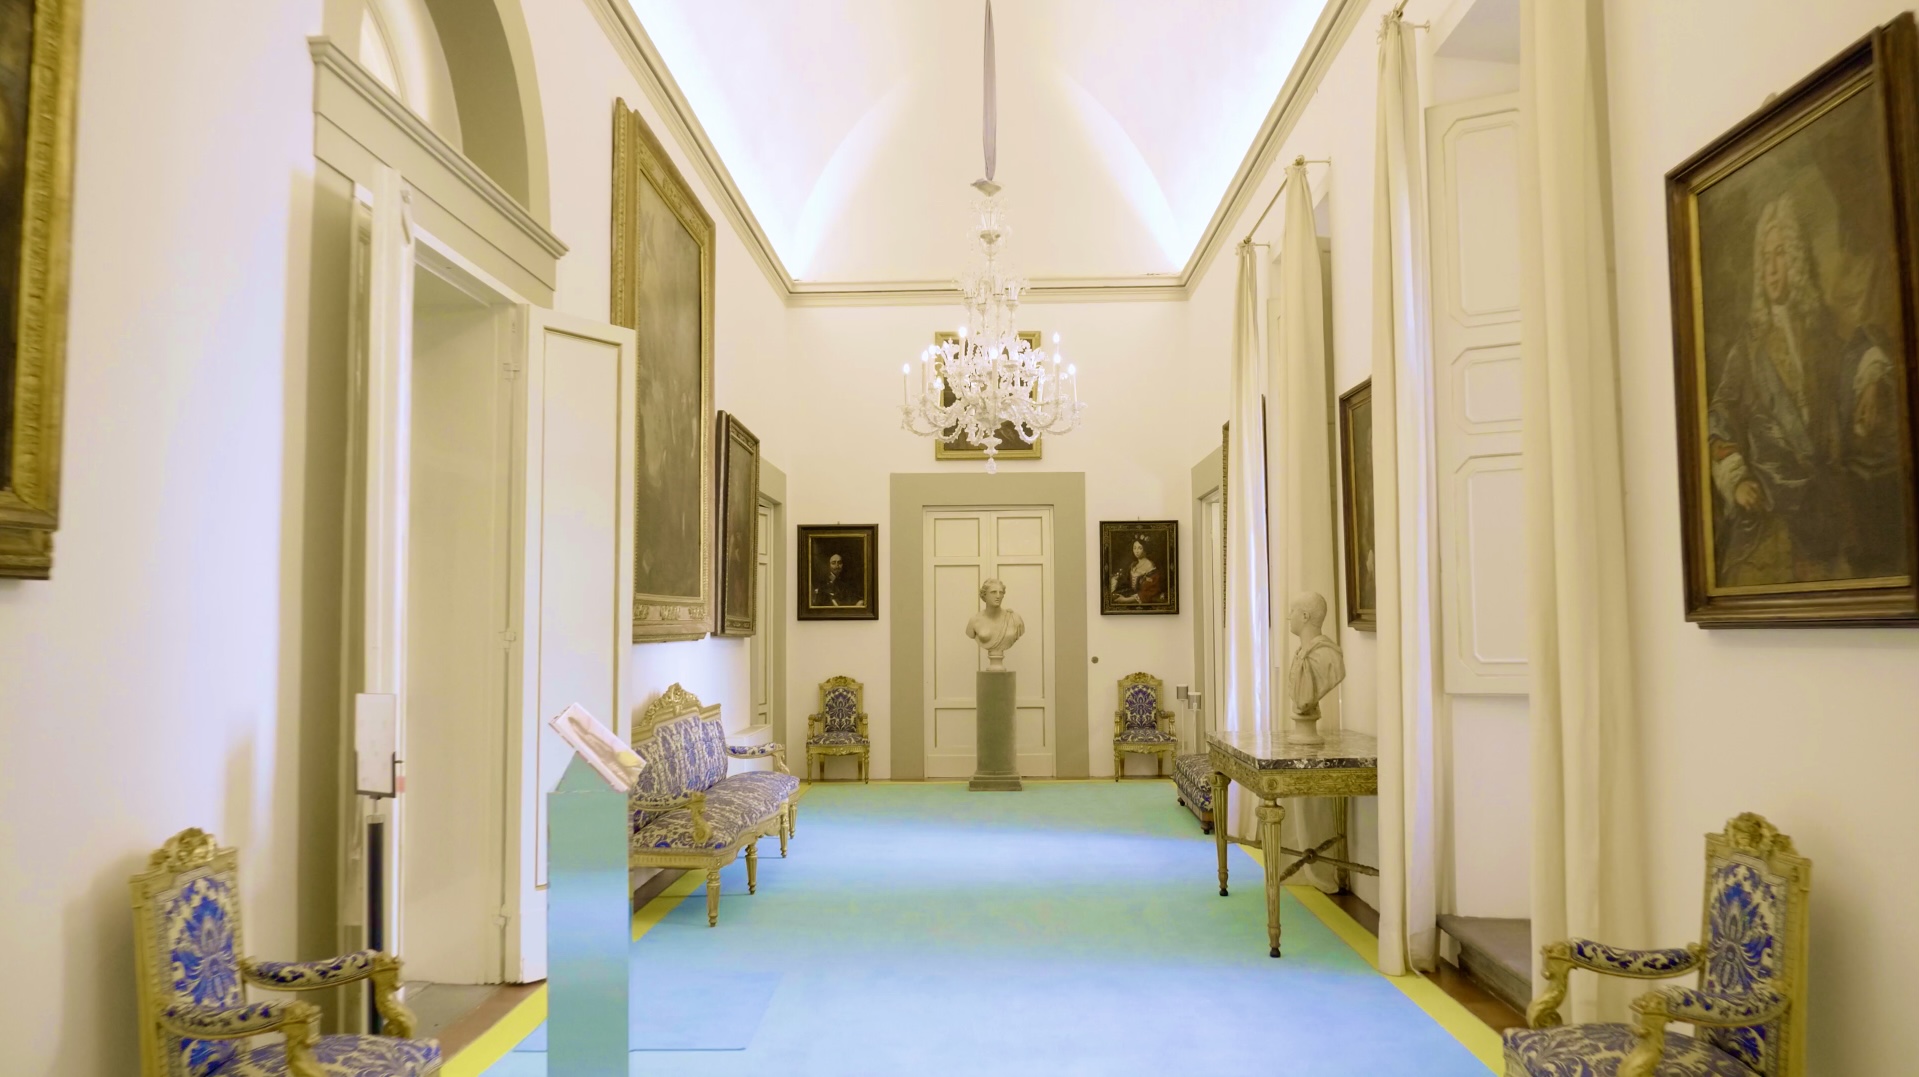 IED expands to Palazzo Pucci